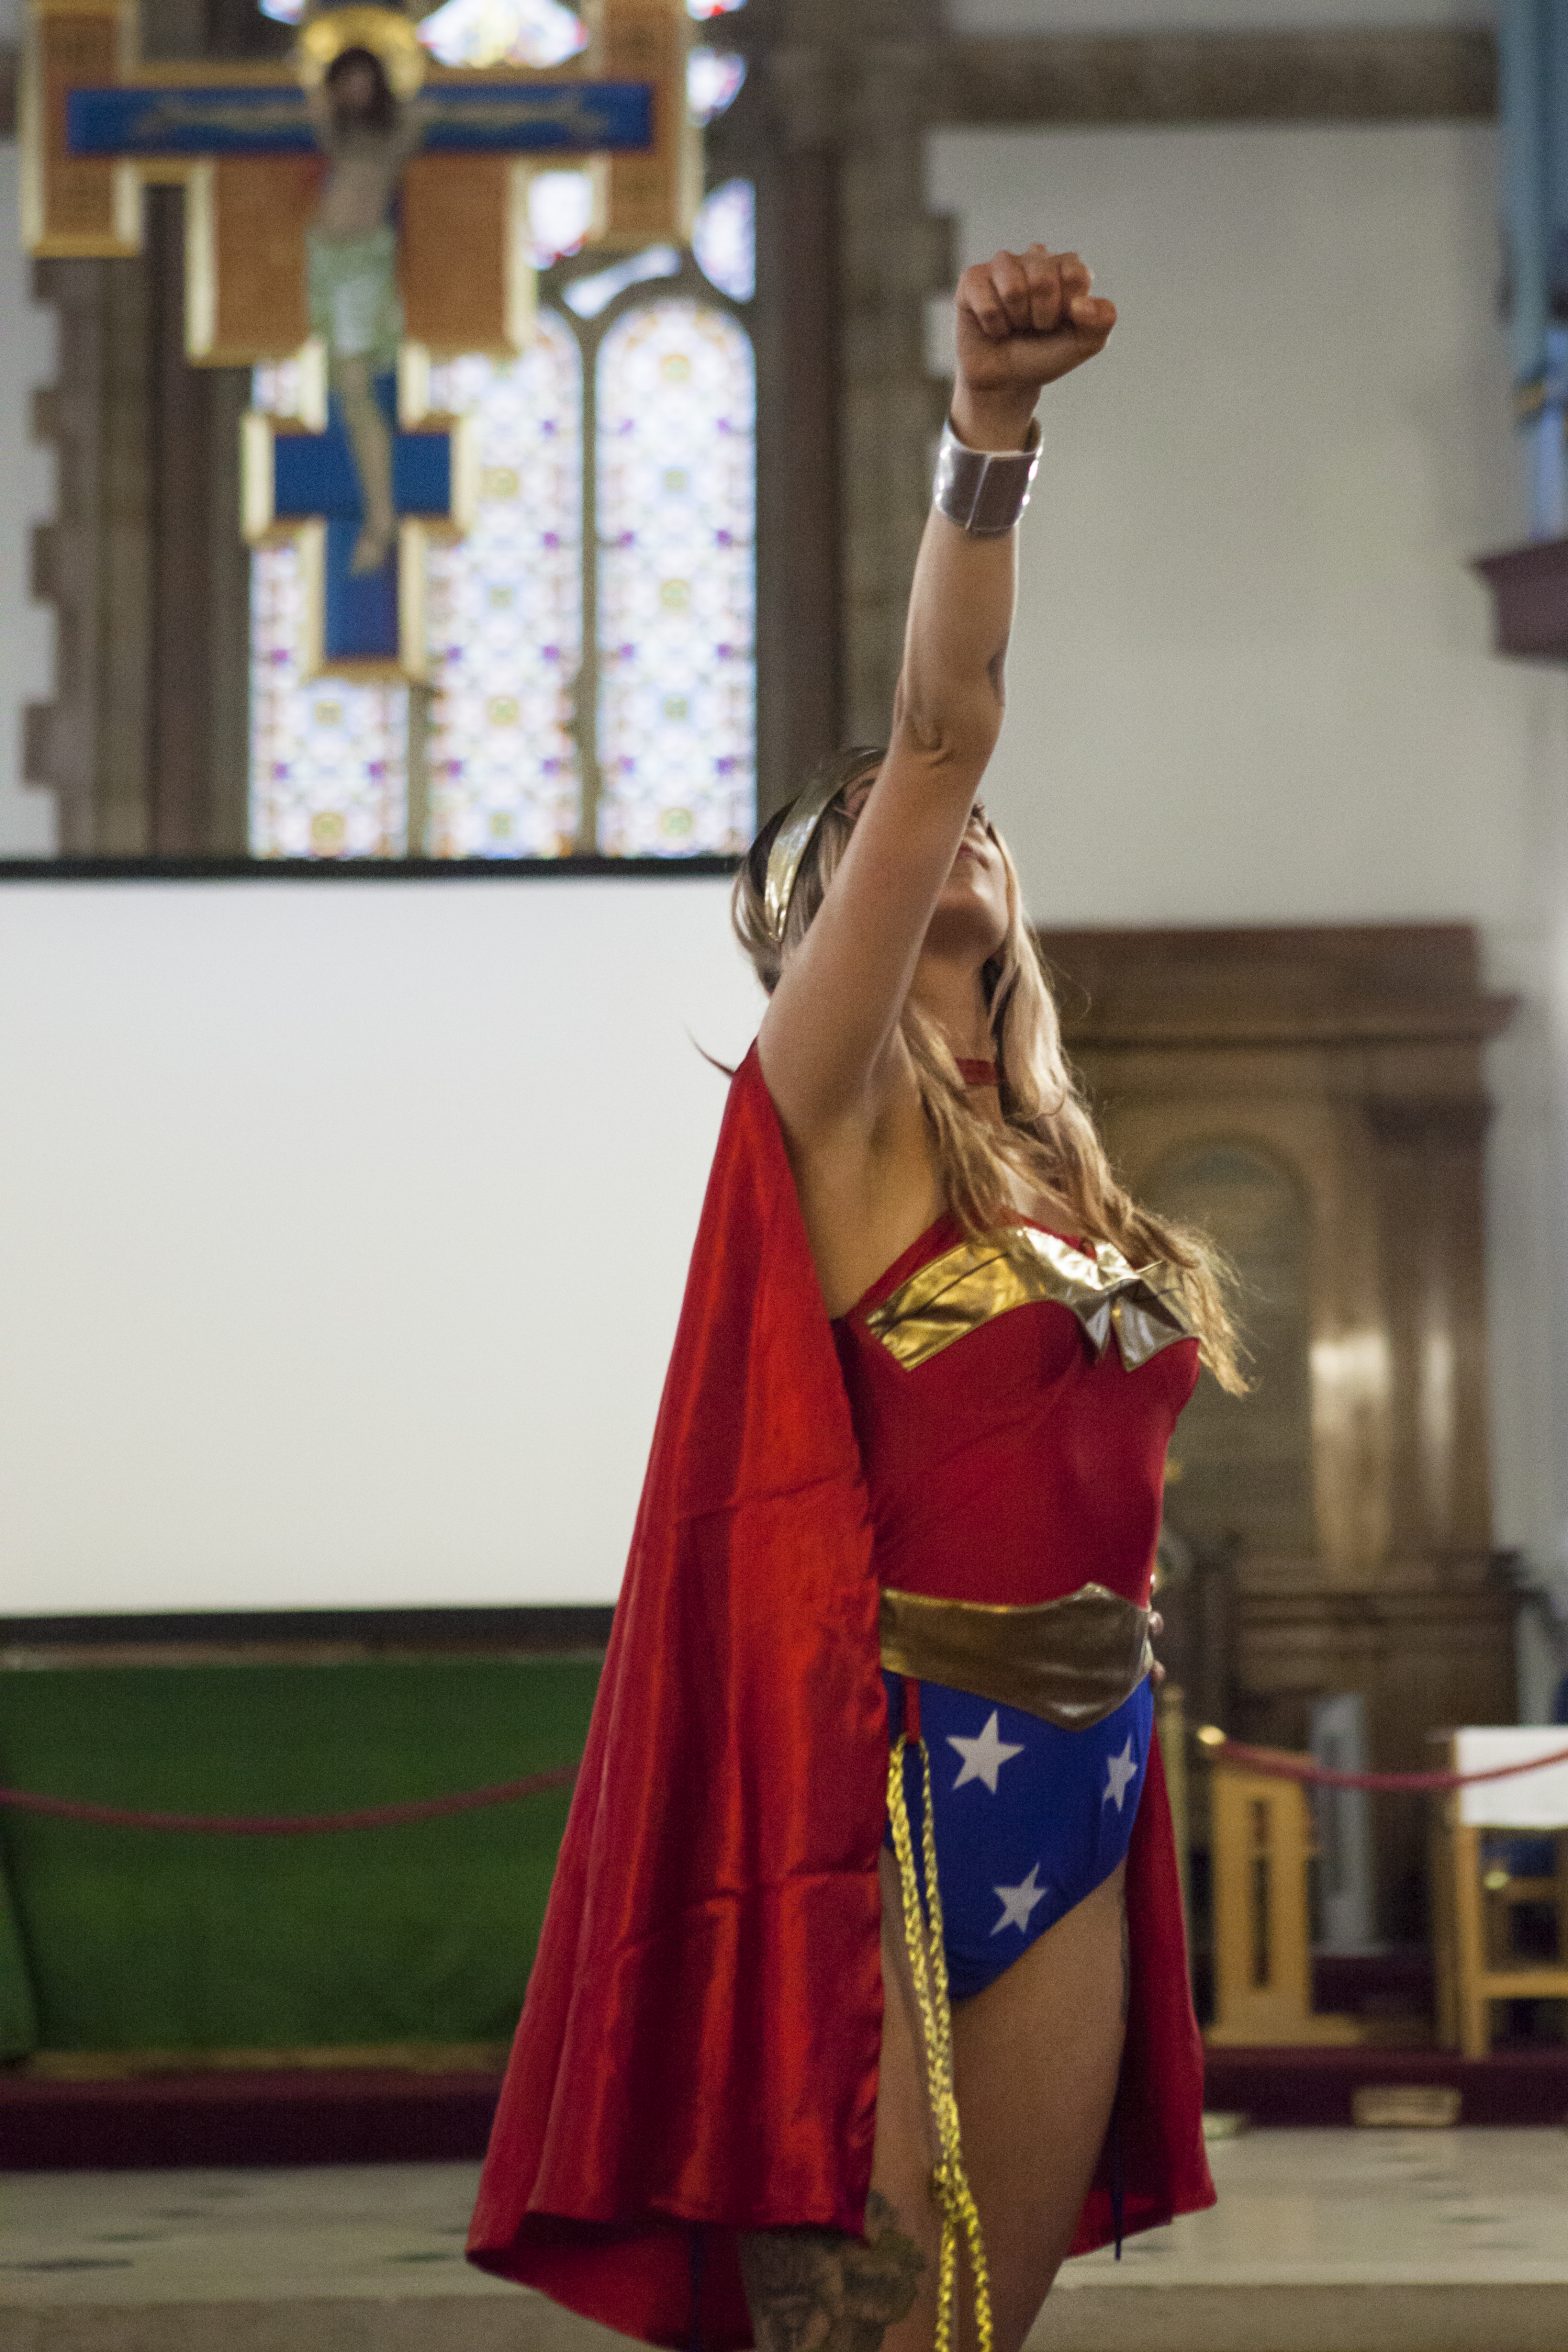 a women dressed as a superhero punches the air.